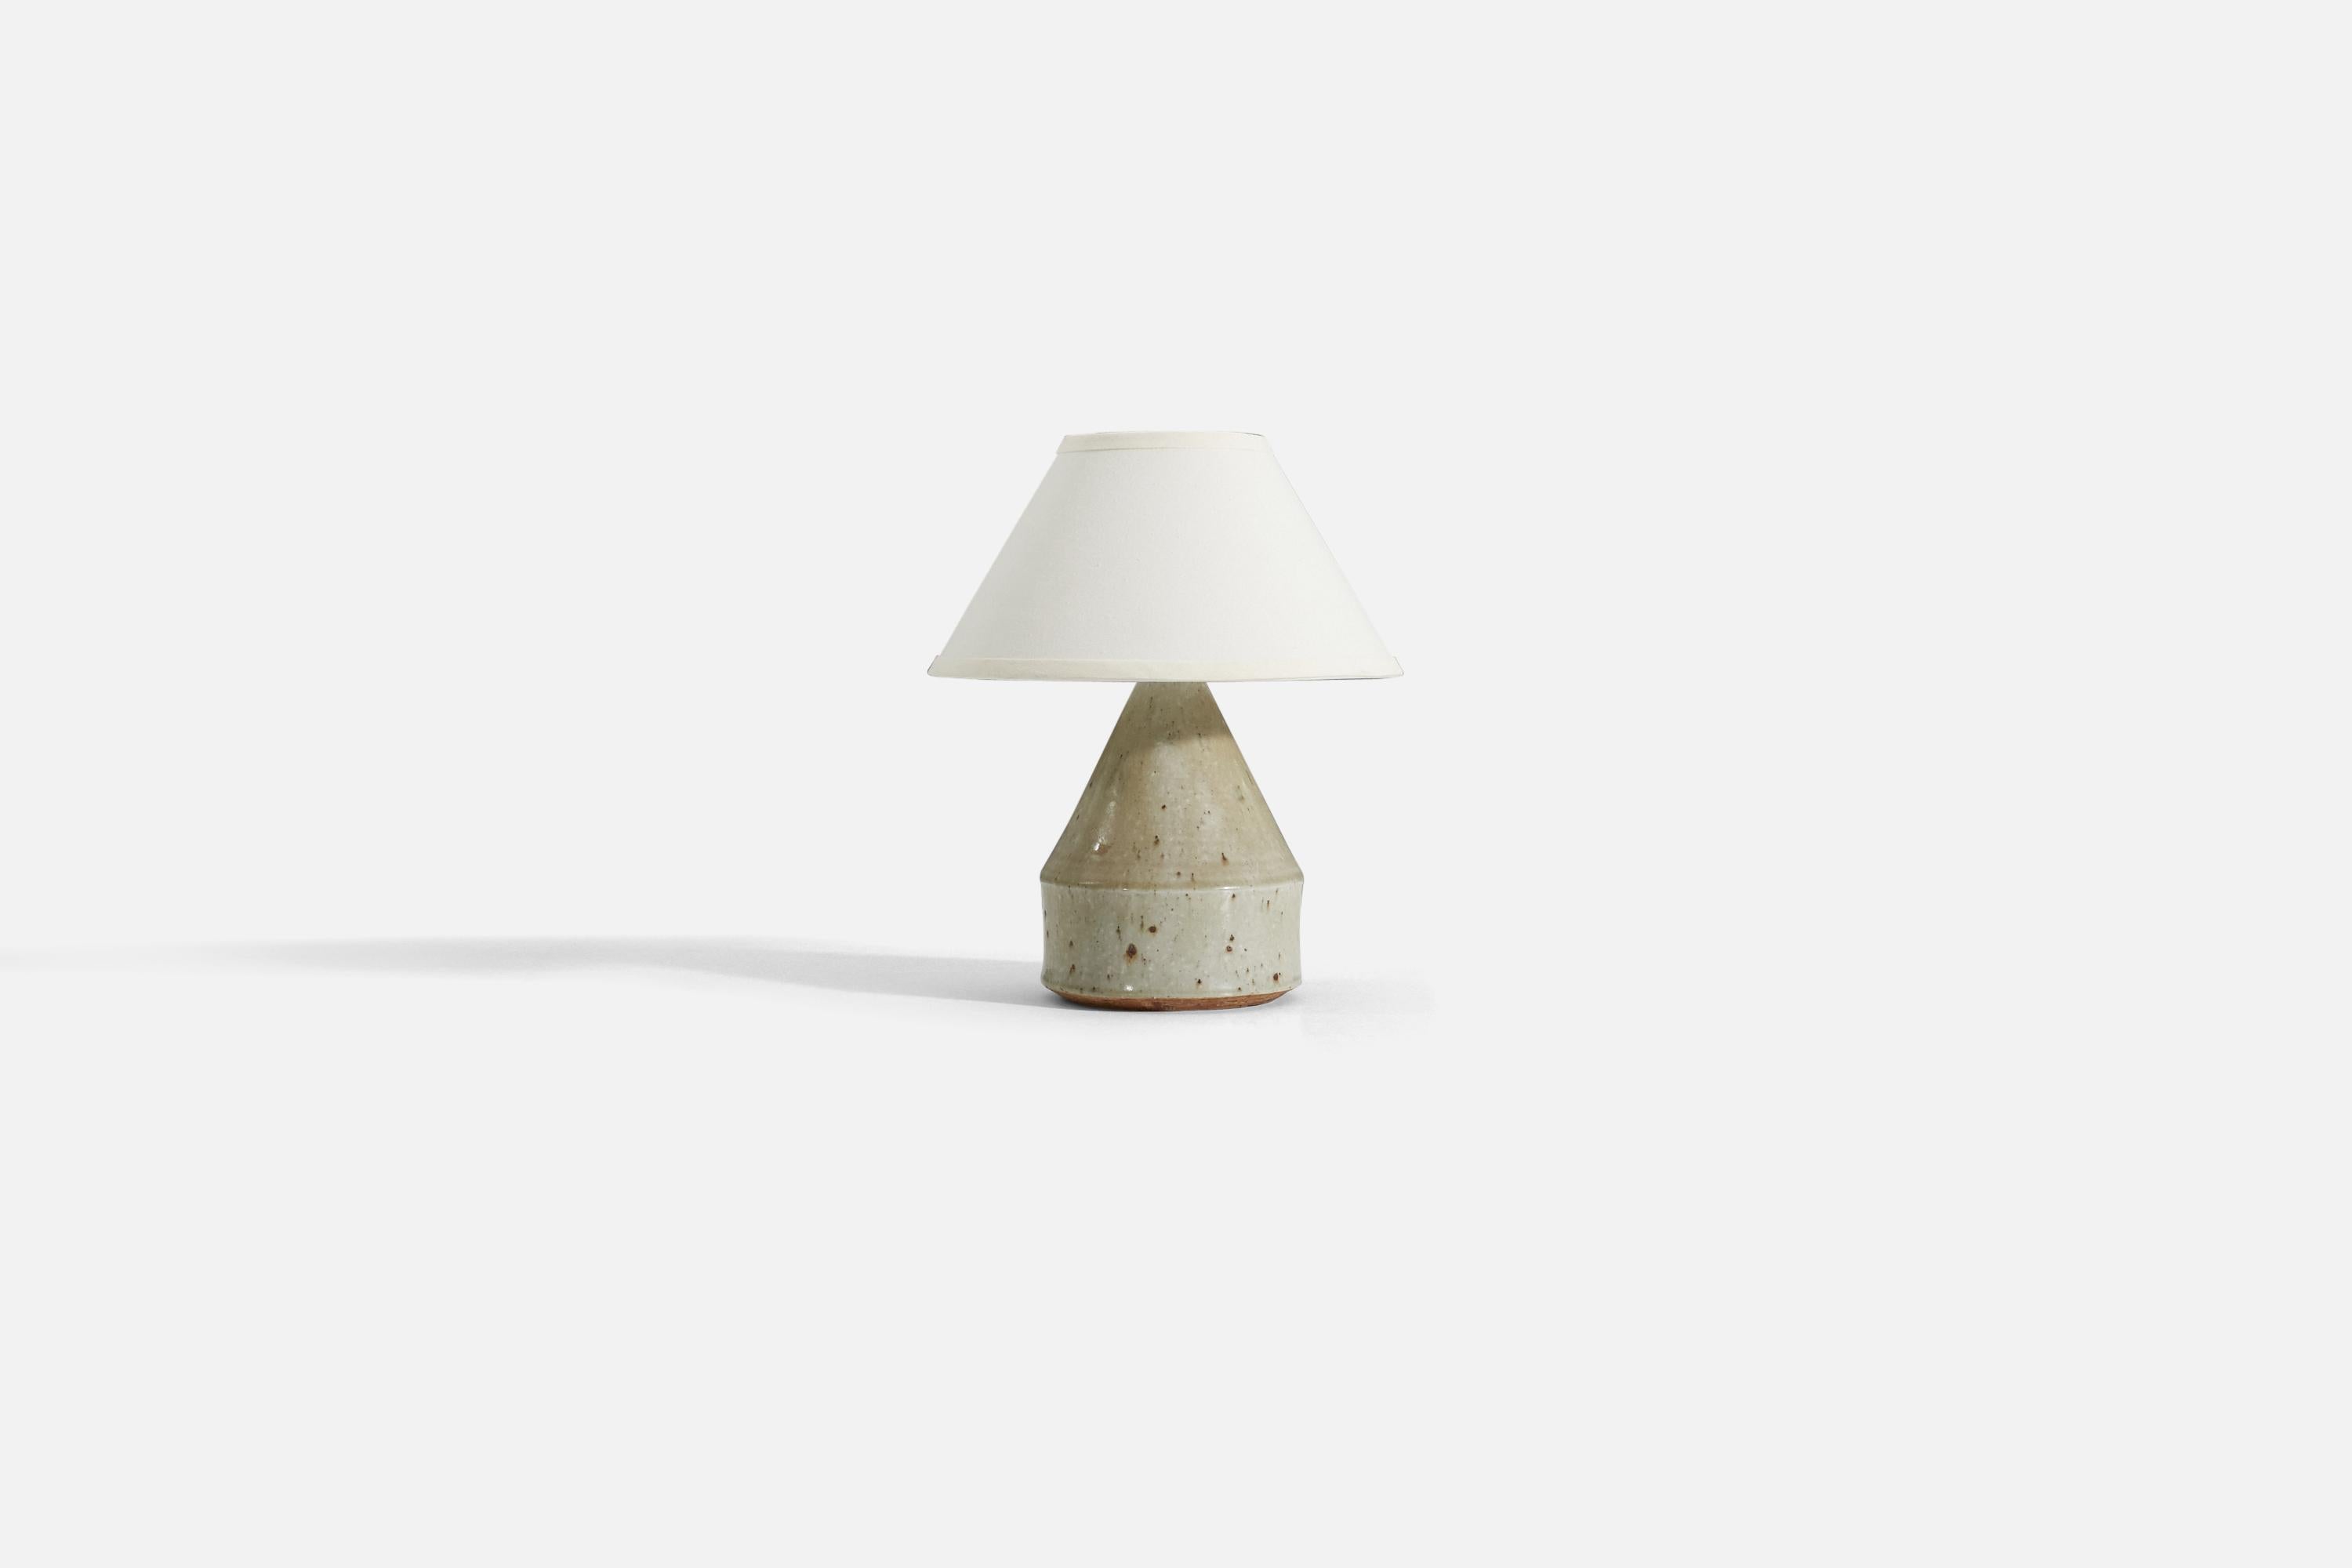 A table lamp in grey-glazed firesand designed by Marianne Westman for Rörstrand, Sweden, 1960s. Signed and marked to underside.

Stated dimensions exclude lampshade. Lampshade is not included in purchase.
For reference:
Measurements of shade : 5